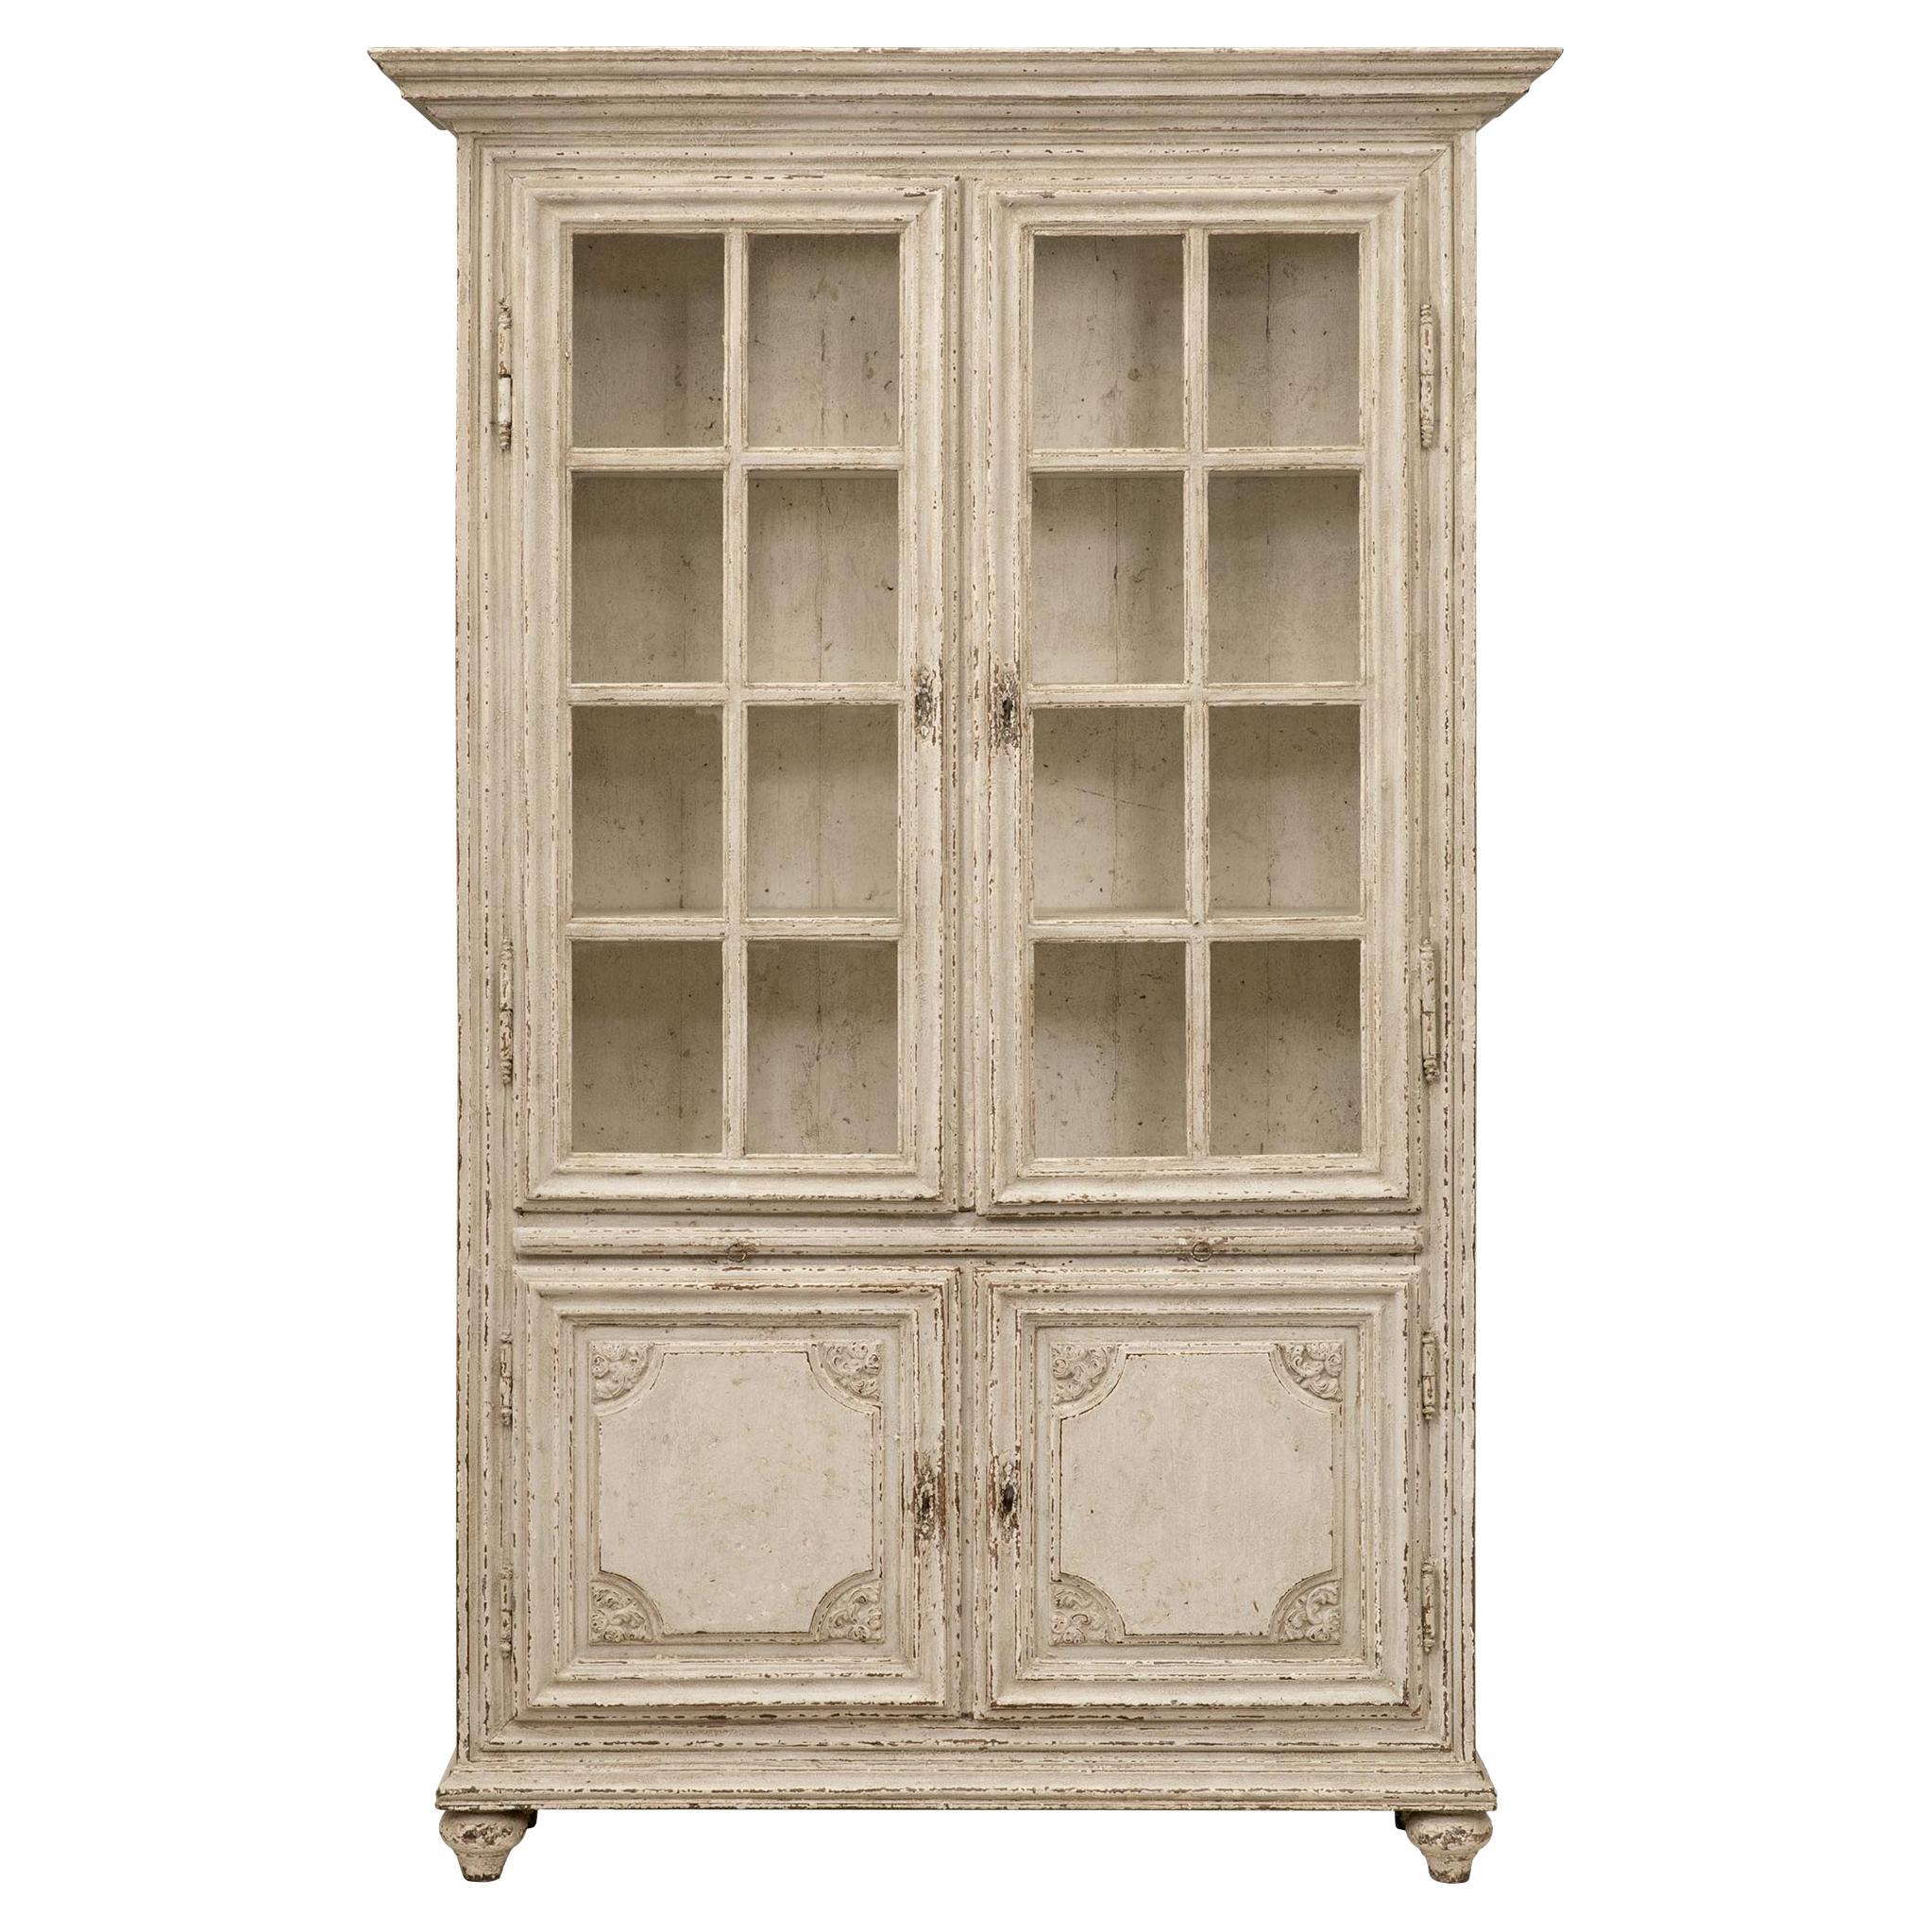 A French 19th century Louis XVI st. patinated wood vitrine cabinet